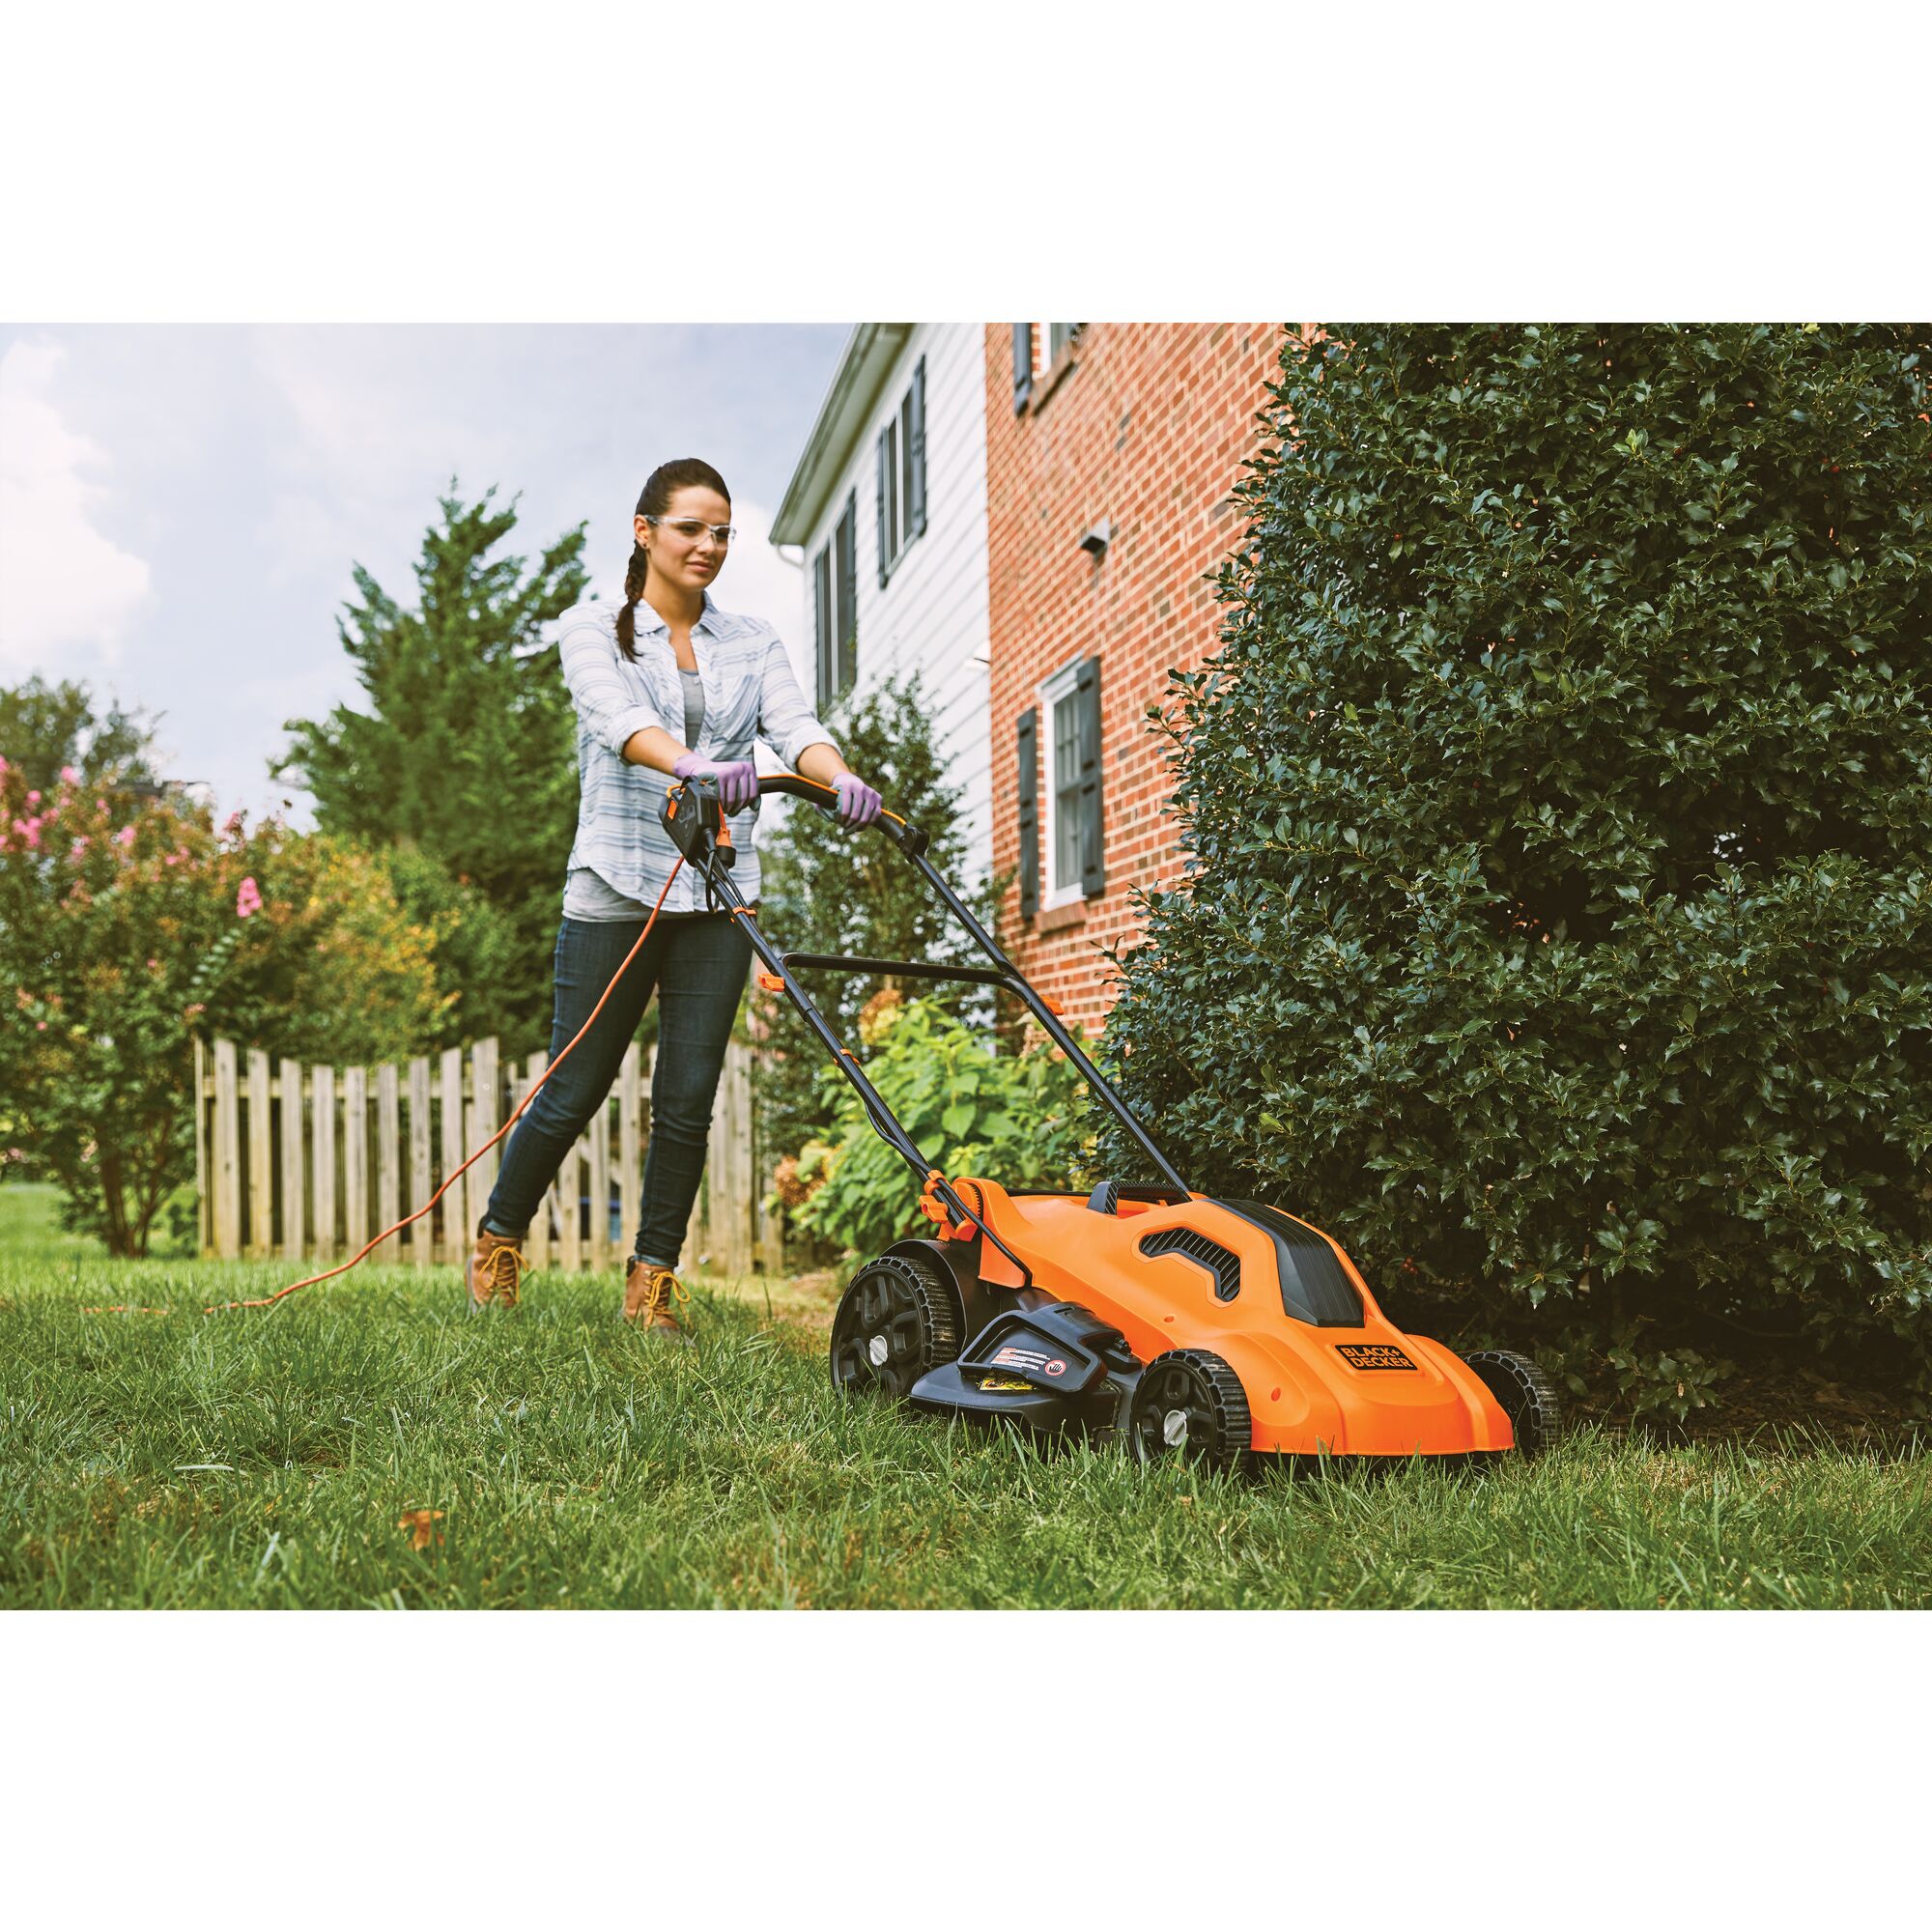 Corded electric lawn mower being used by a person to cut grass.